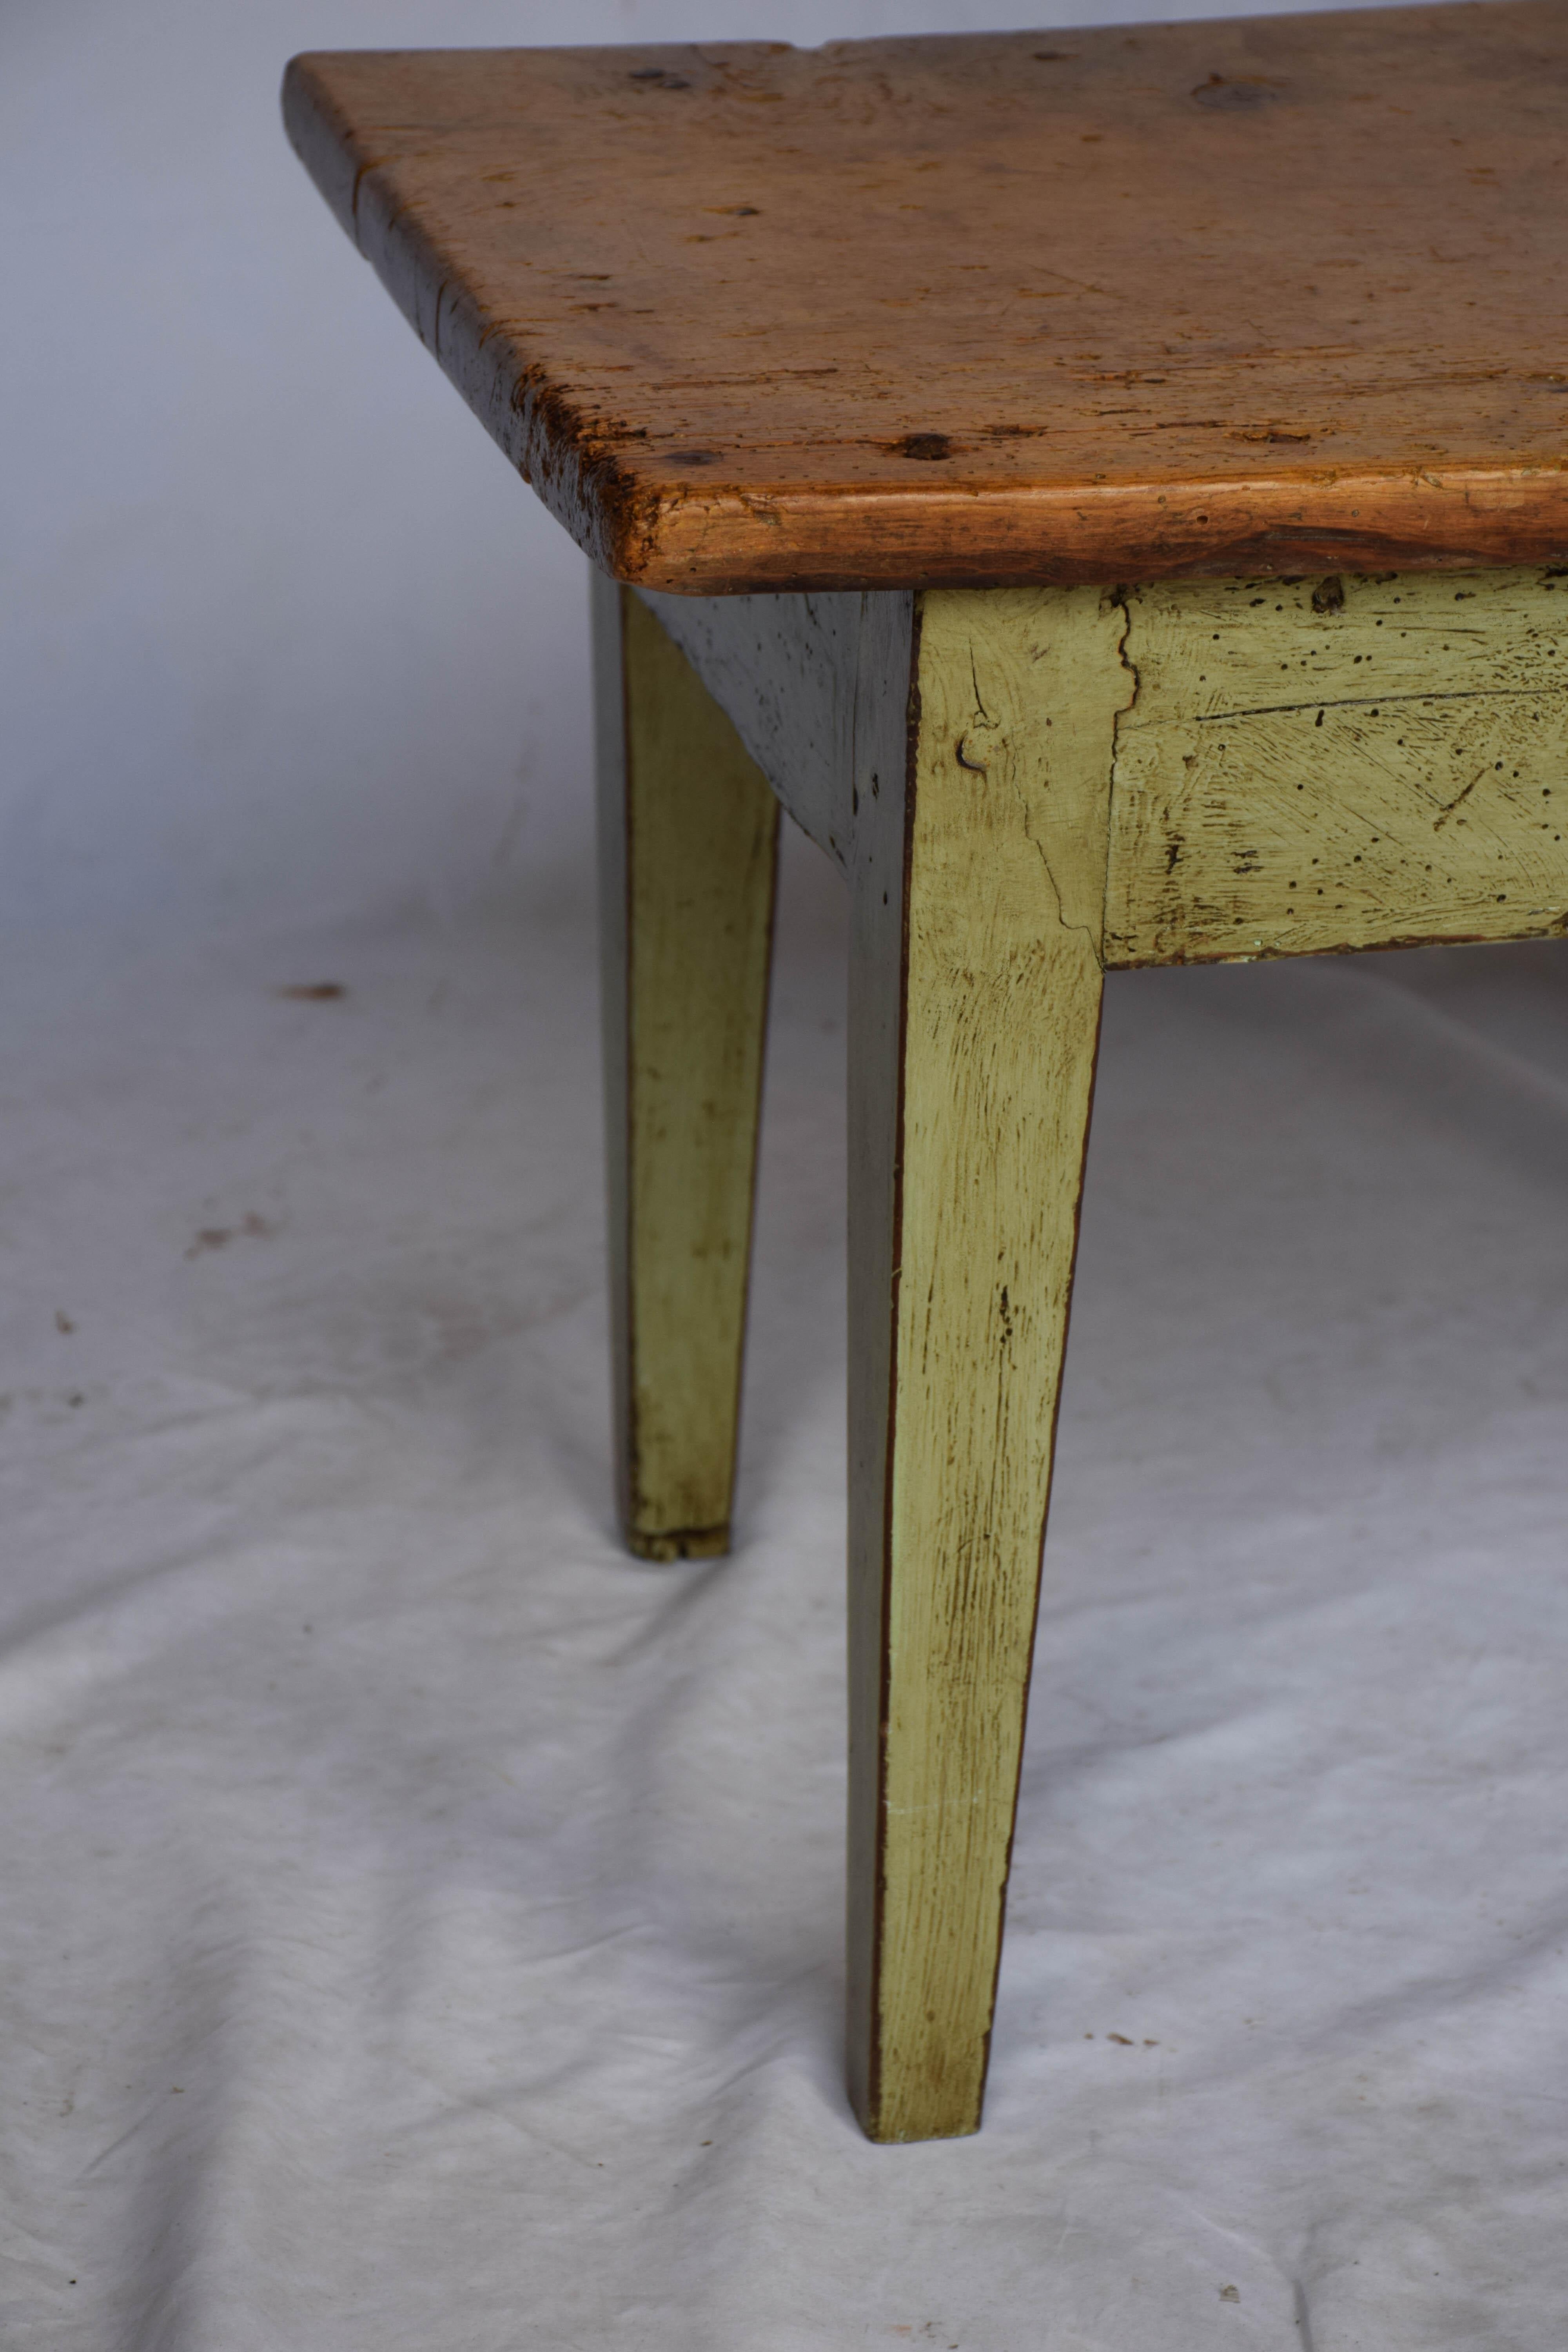 This small Spanish low table can be used as a coffee table or a side table. The top is a natural finish wood and the bottom portion is painted a soft green. This petite table could be at home in many spots.